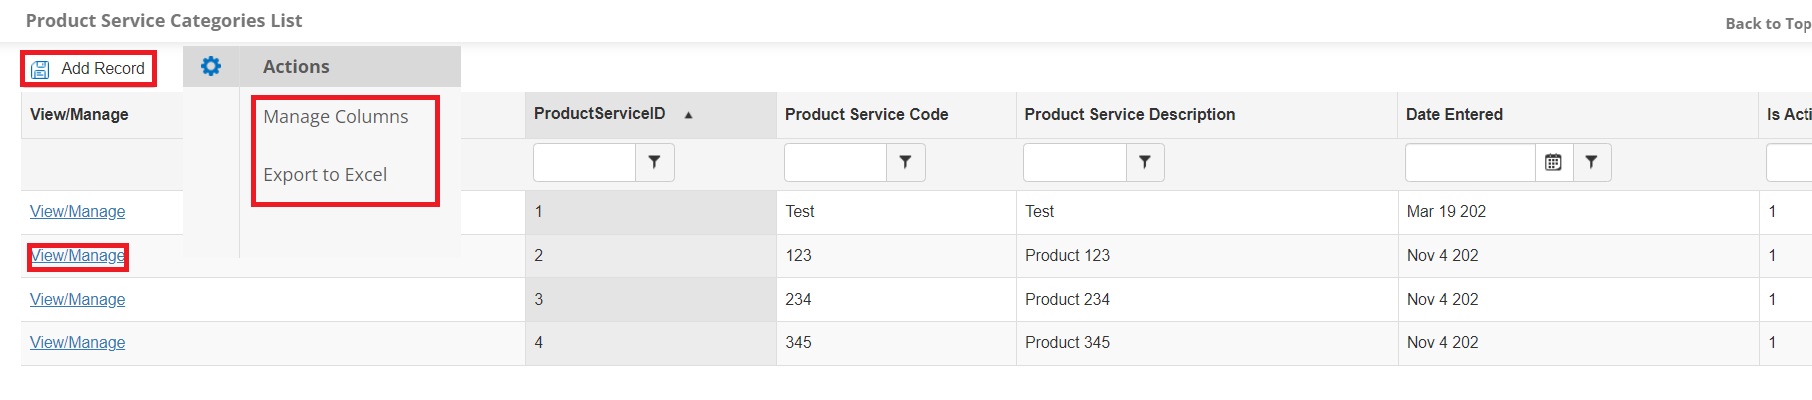 Product Service Categories List